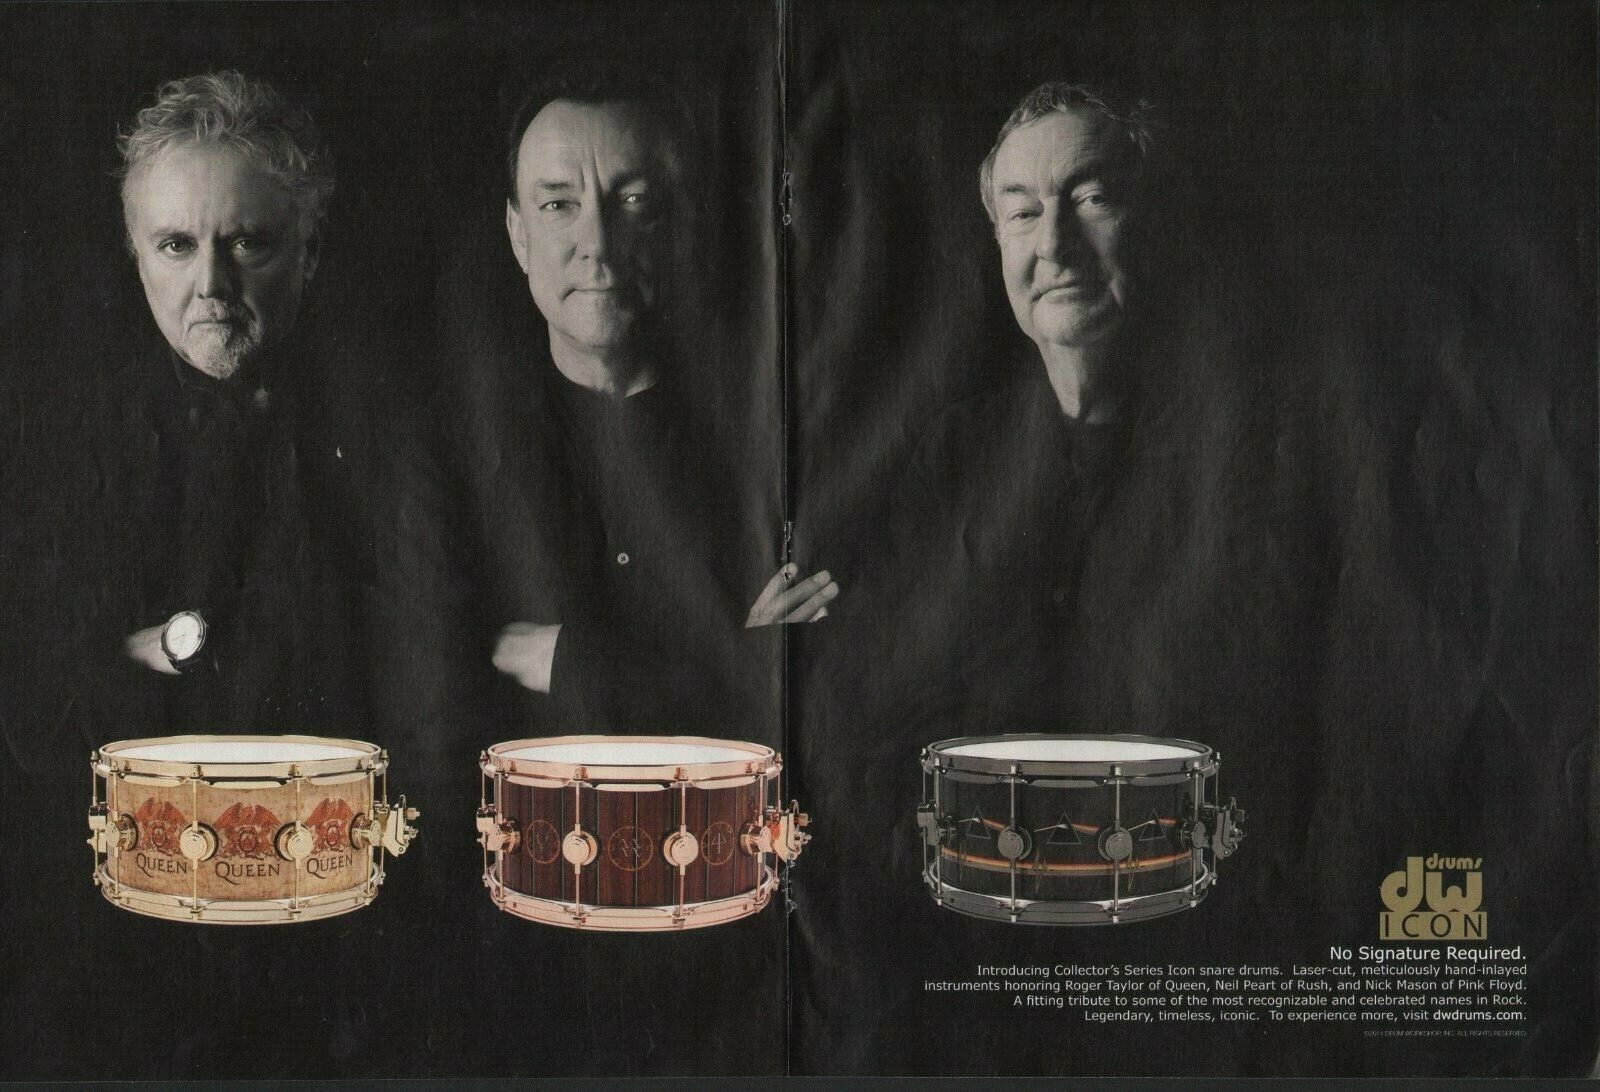 2014 Print Ad of DW Icon Snare Drums Roger Taylor, Neil Peart RUSH, Nick Mason